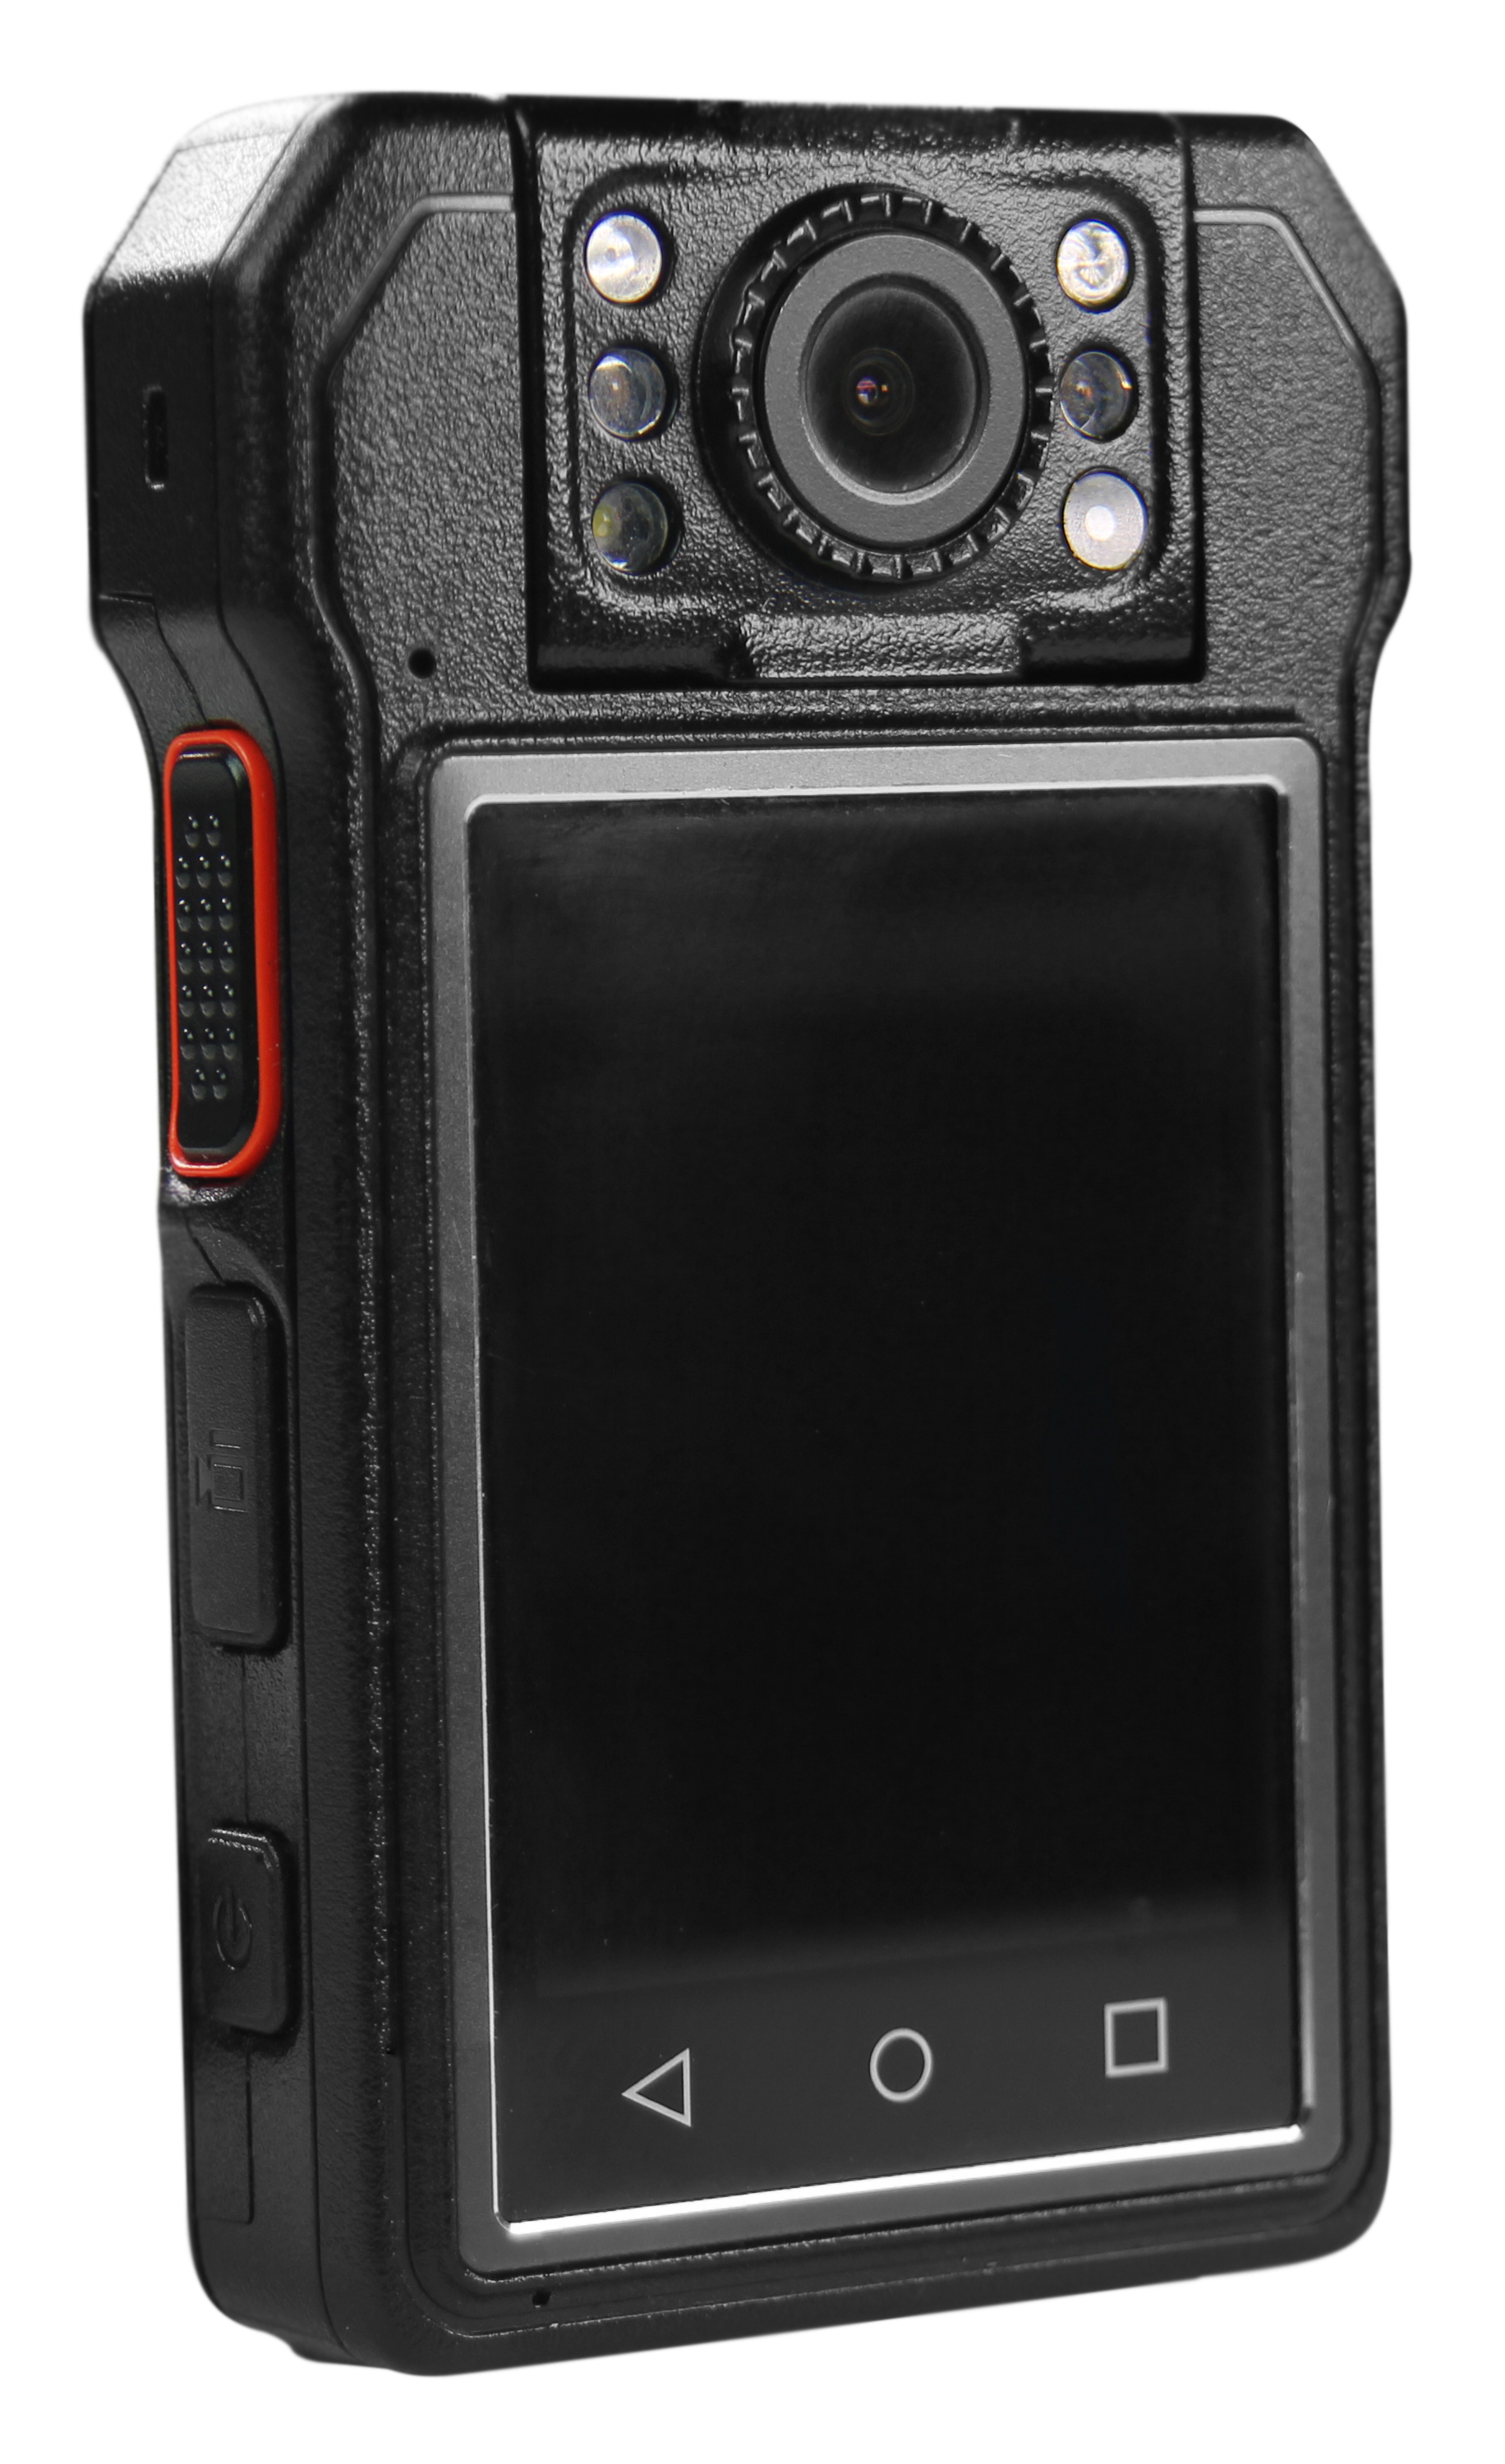 wolfcom x1 police body camera front screen